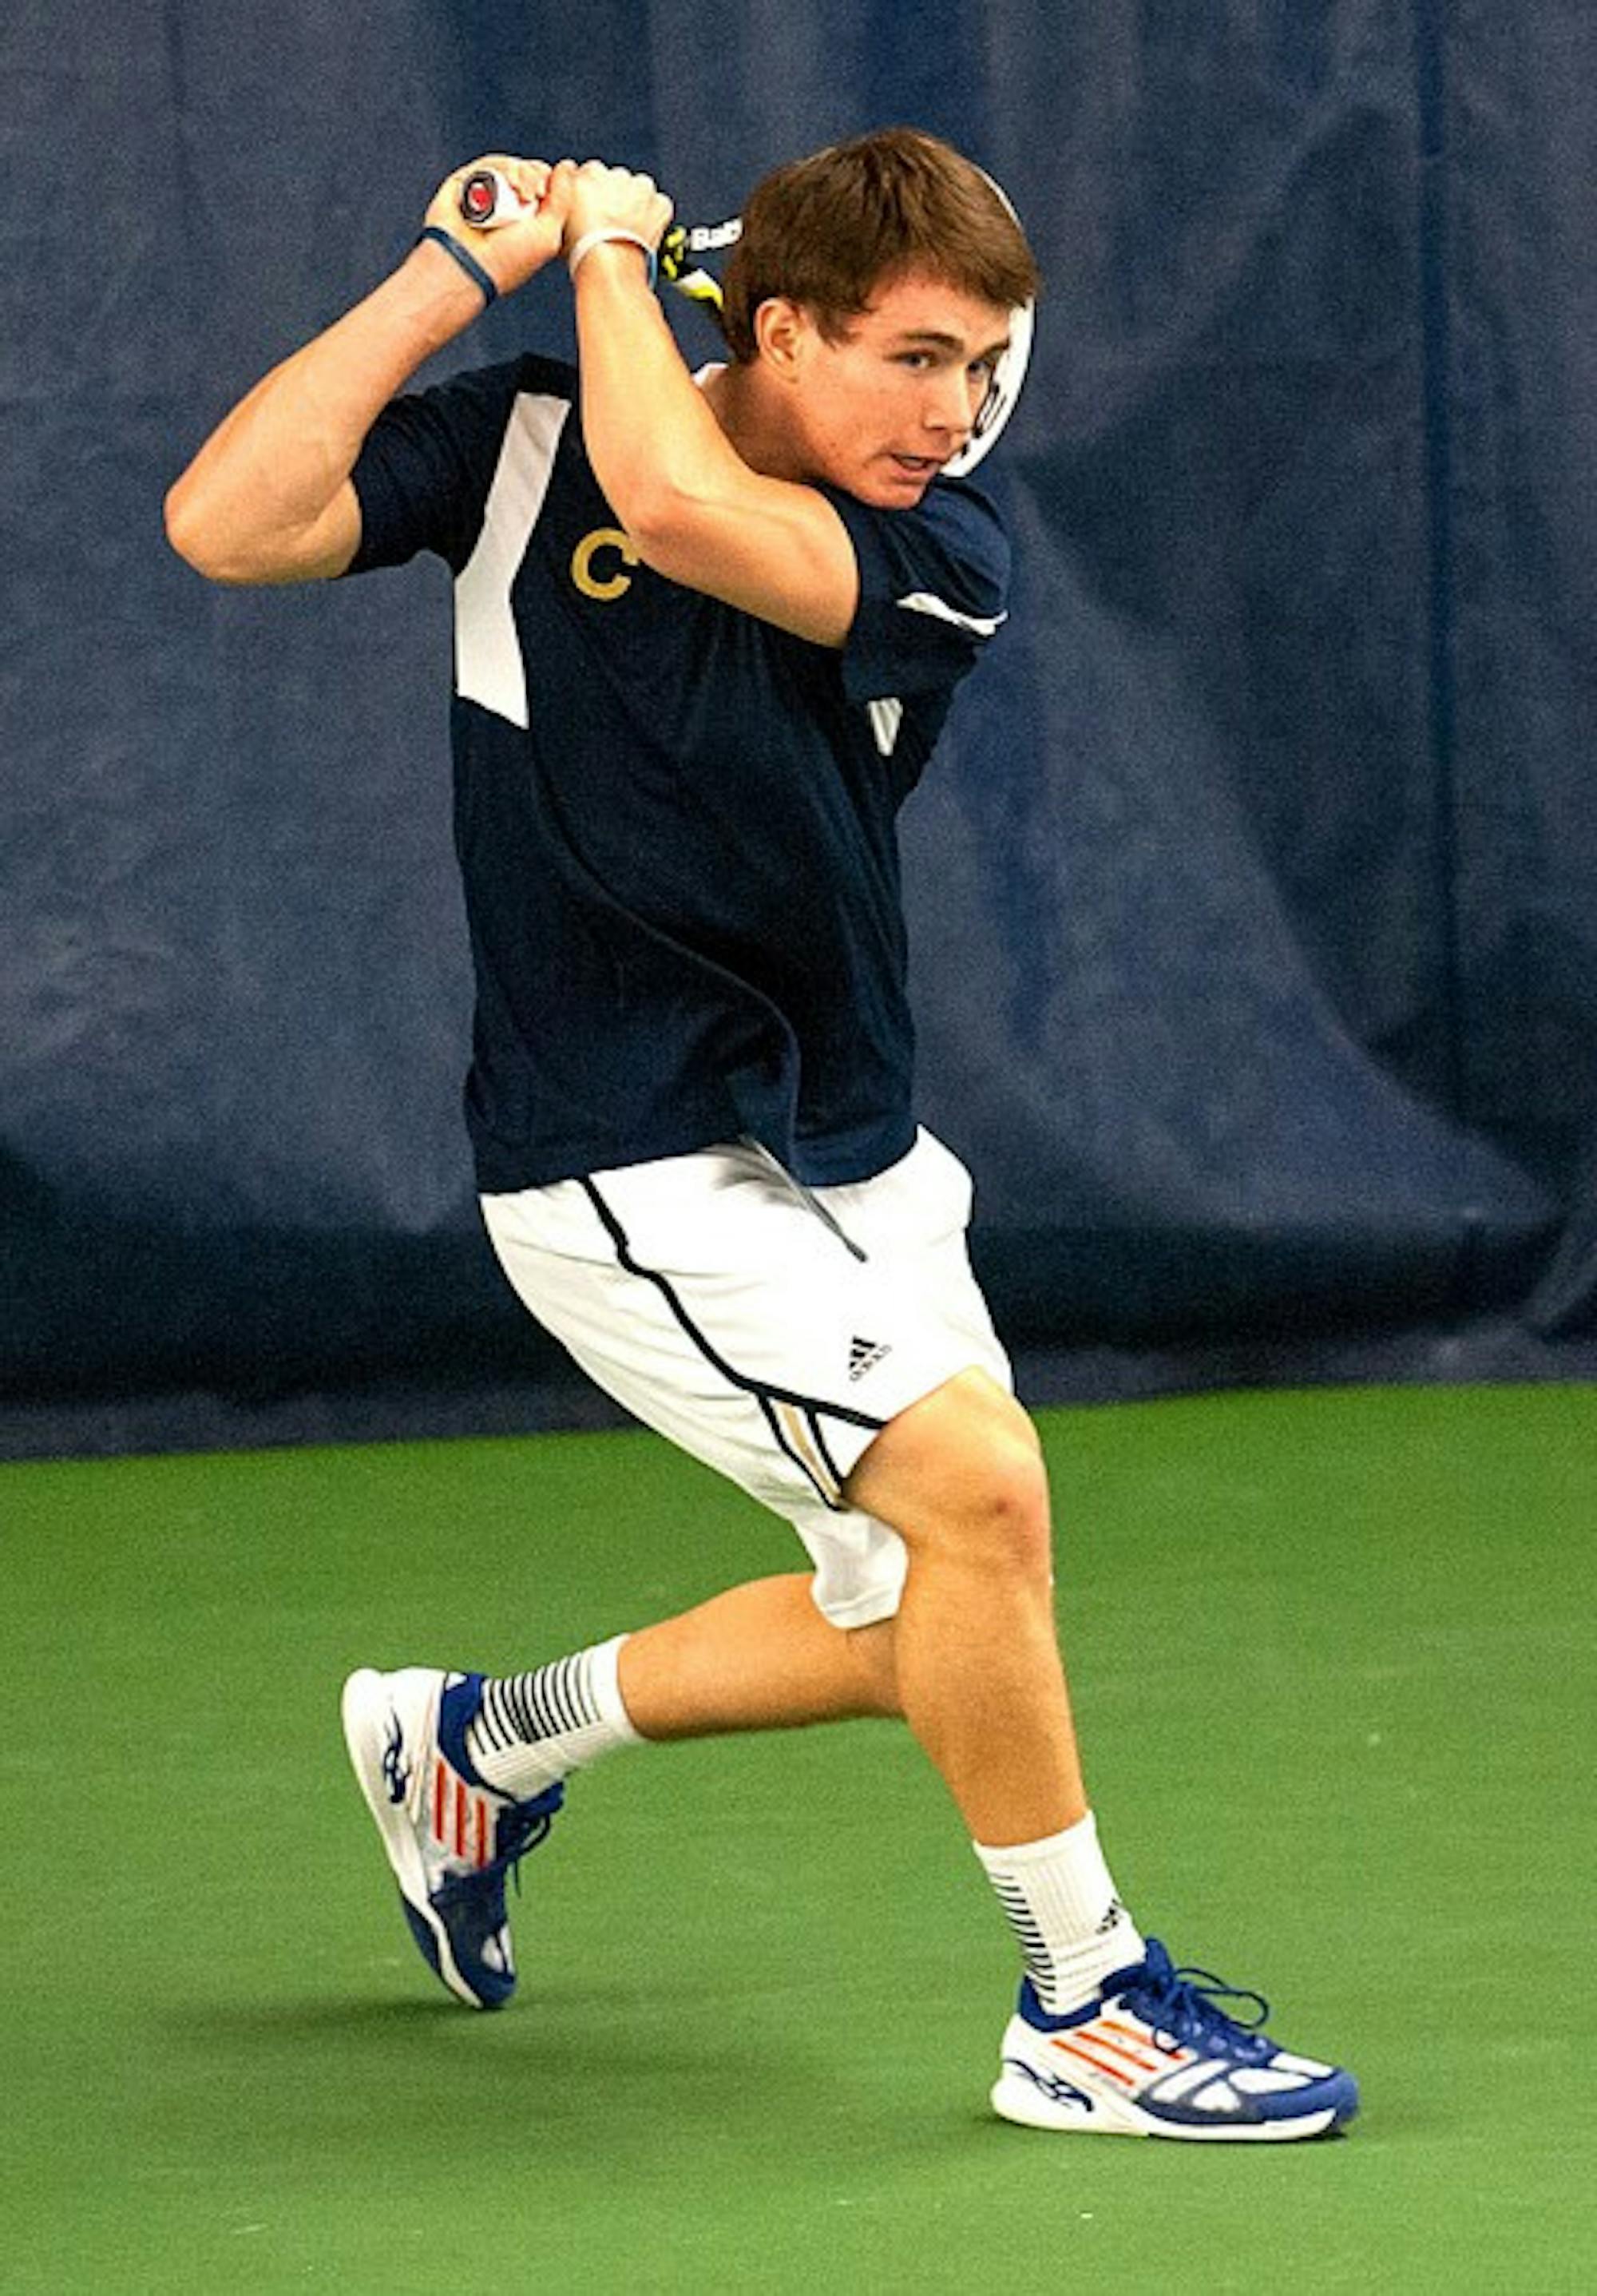 Senior captain Greg Andrews returns a shot against Kentucky’s Tom Jomby (not pictured) on Feb. 2 at the Eck Tennis Pavilion. Andrews and the Irish take on Northwestern today at the Combe Tennis Center in Evanston, Ill.